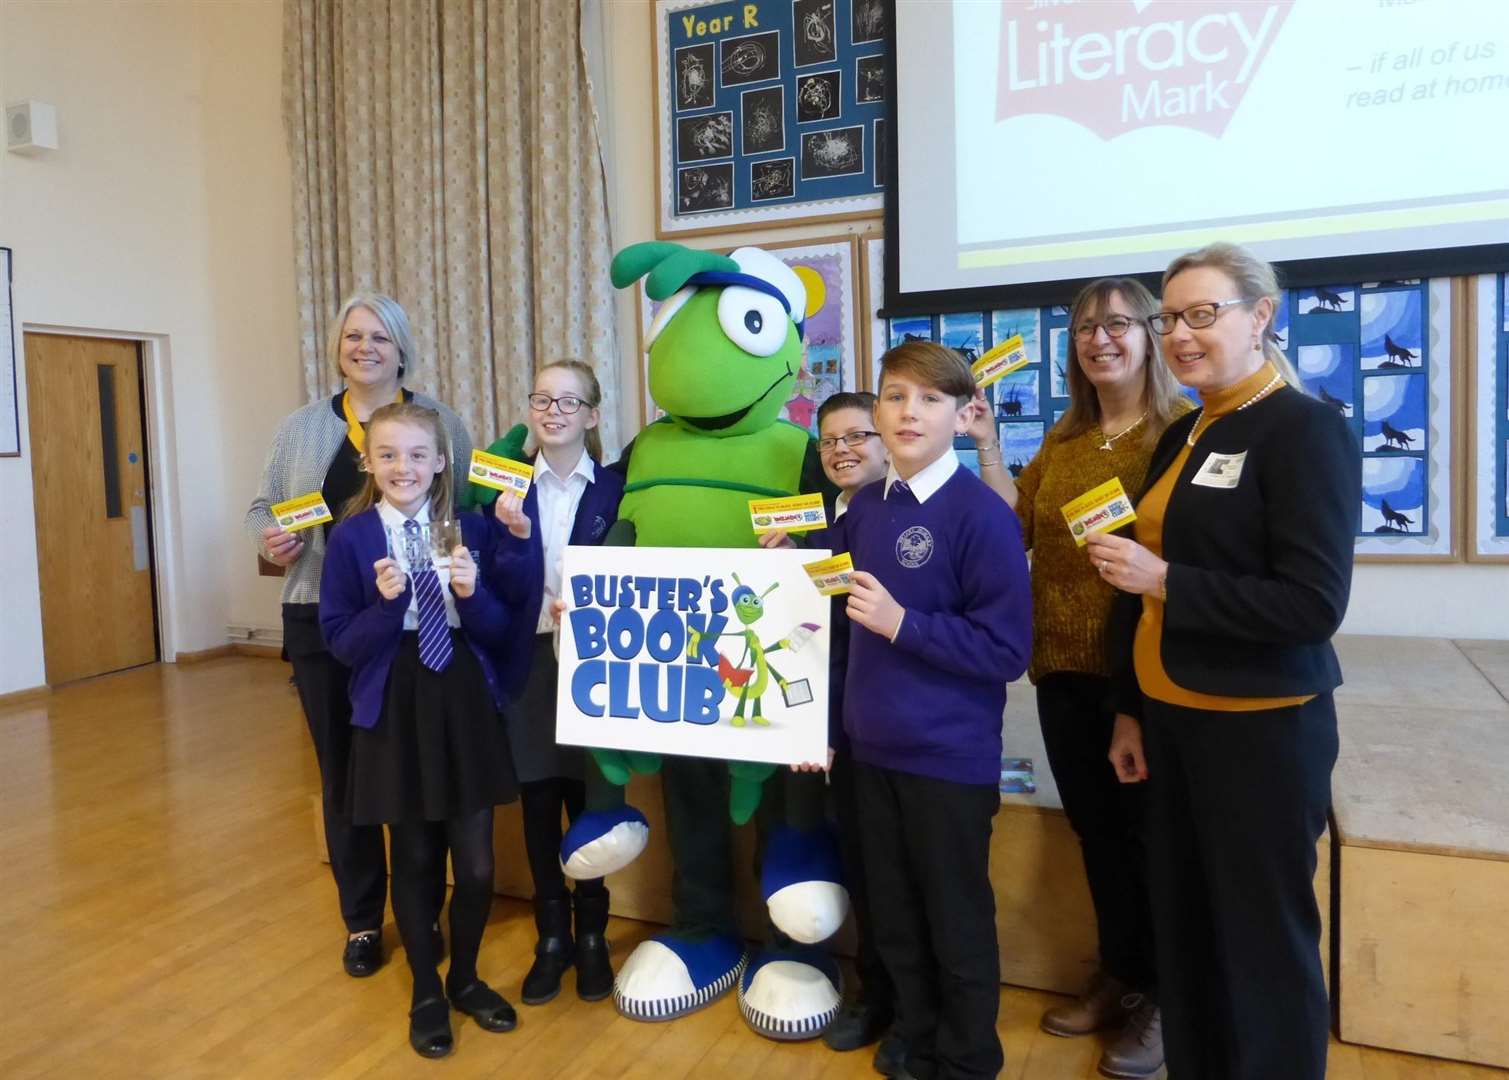 Year 6 pupils with Sarah Finnis, President Elect of the Rotary Club of Herne Bay, Fi Gallimore, teacher, and Mary Pole of the Rotary Club of Herne Bay. (7091808)